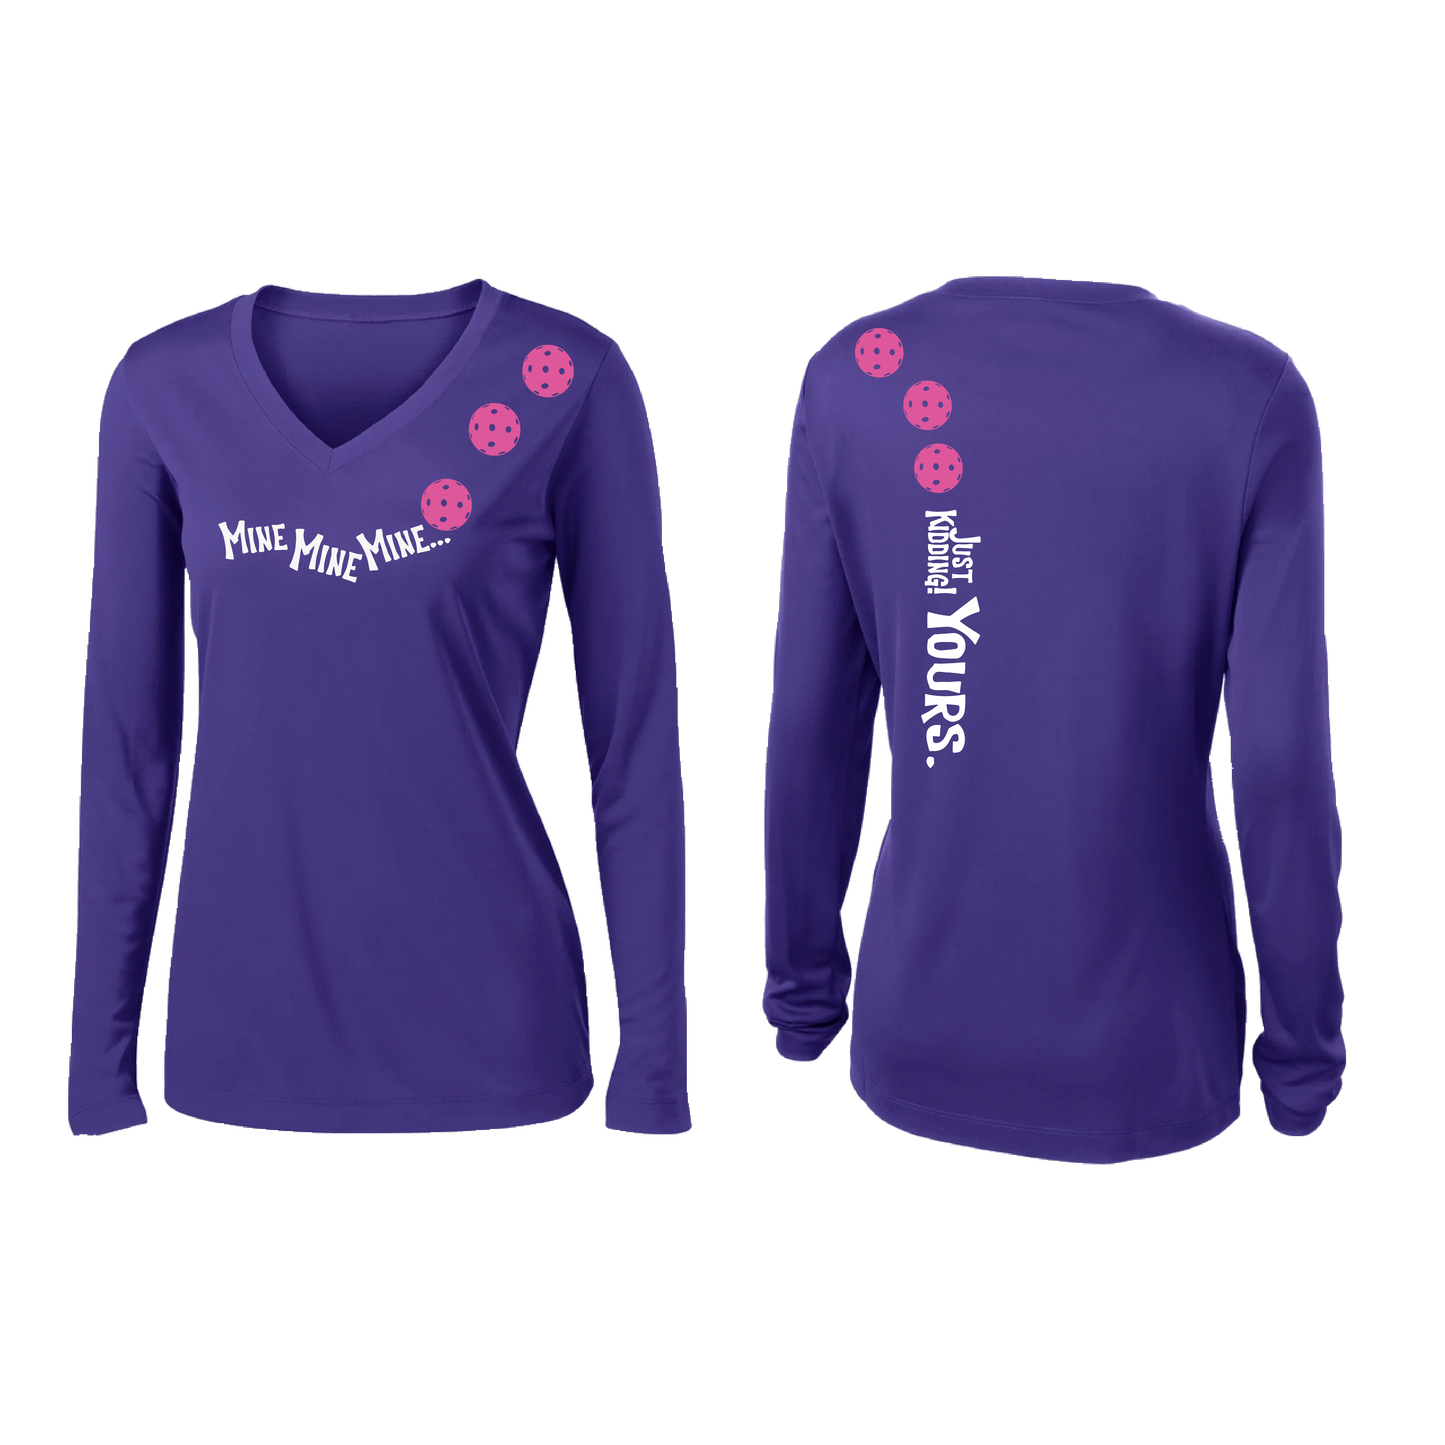 Mine JK Yours (Pickleball colors Green Rainbow or Pink)| Women's Long Sleeve V-Neck Pickleball Shirts | 100% Polyester